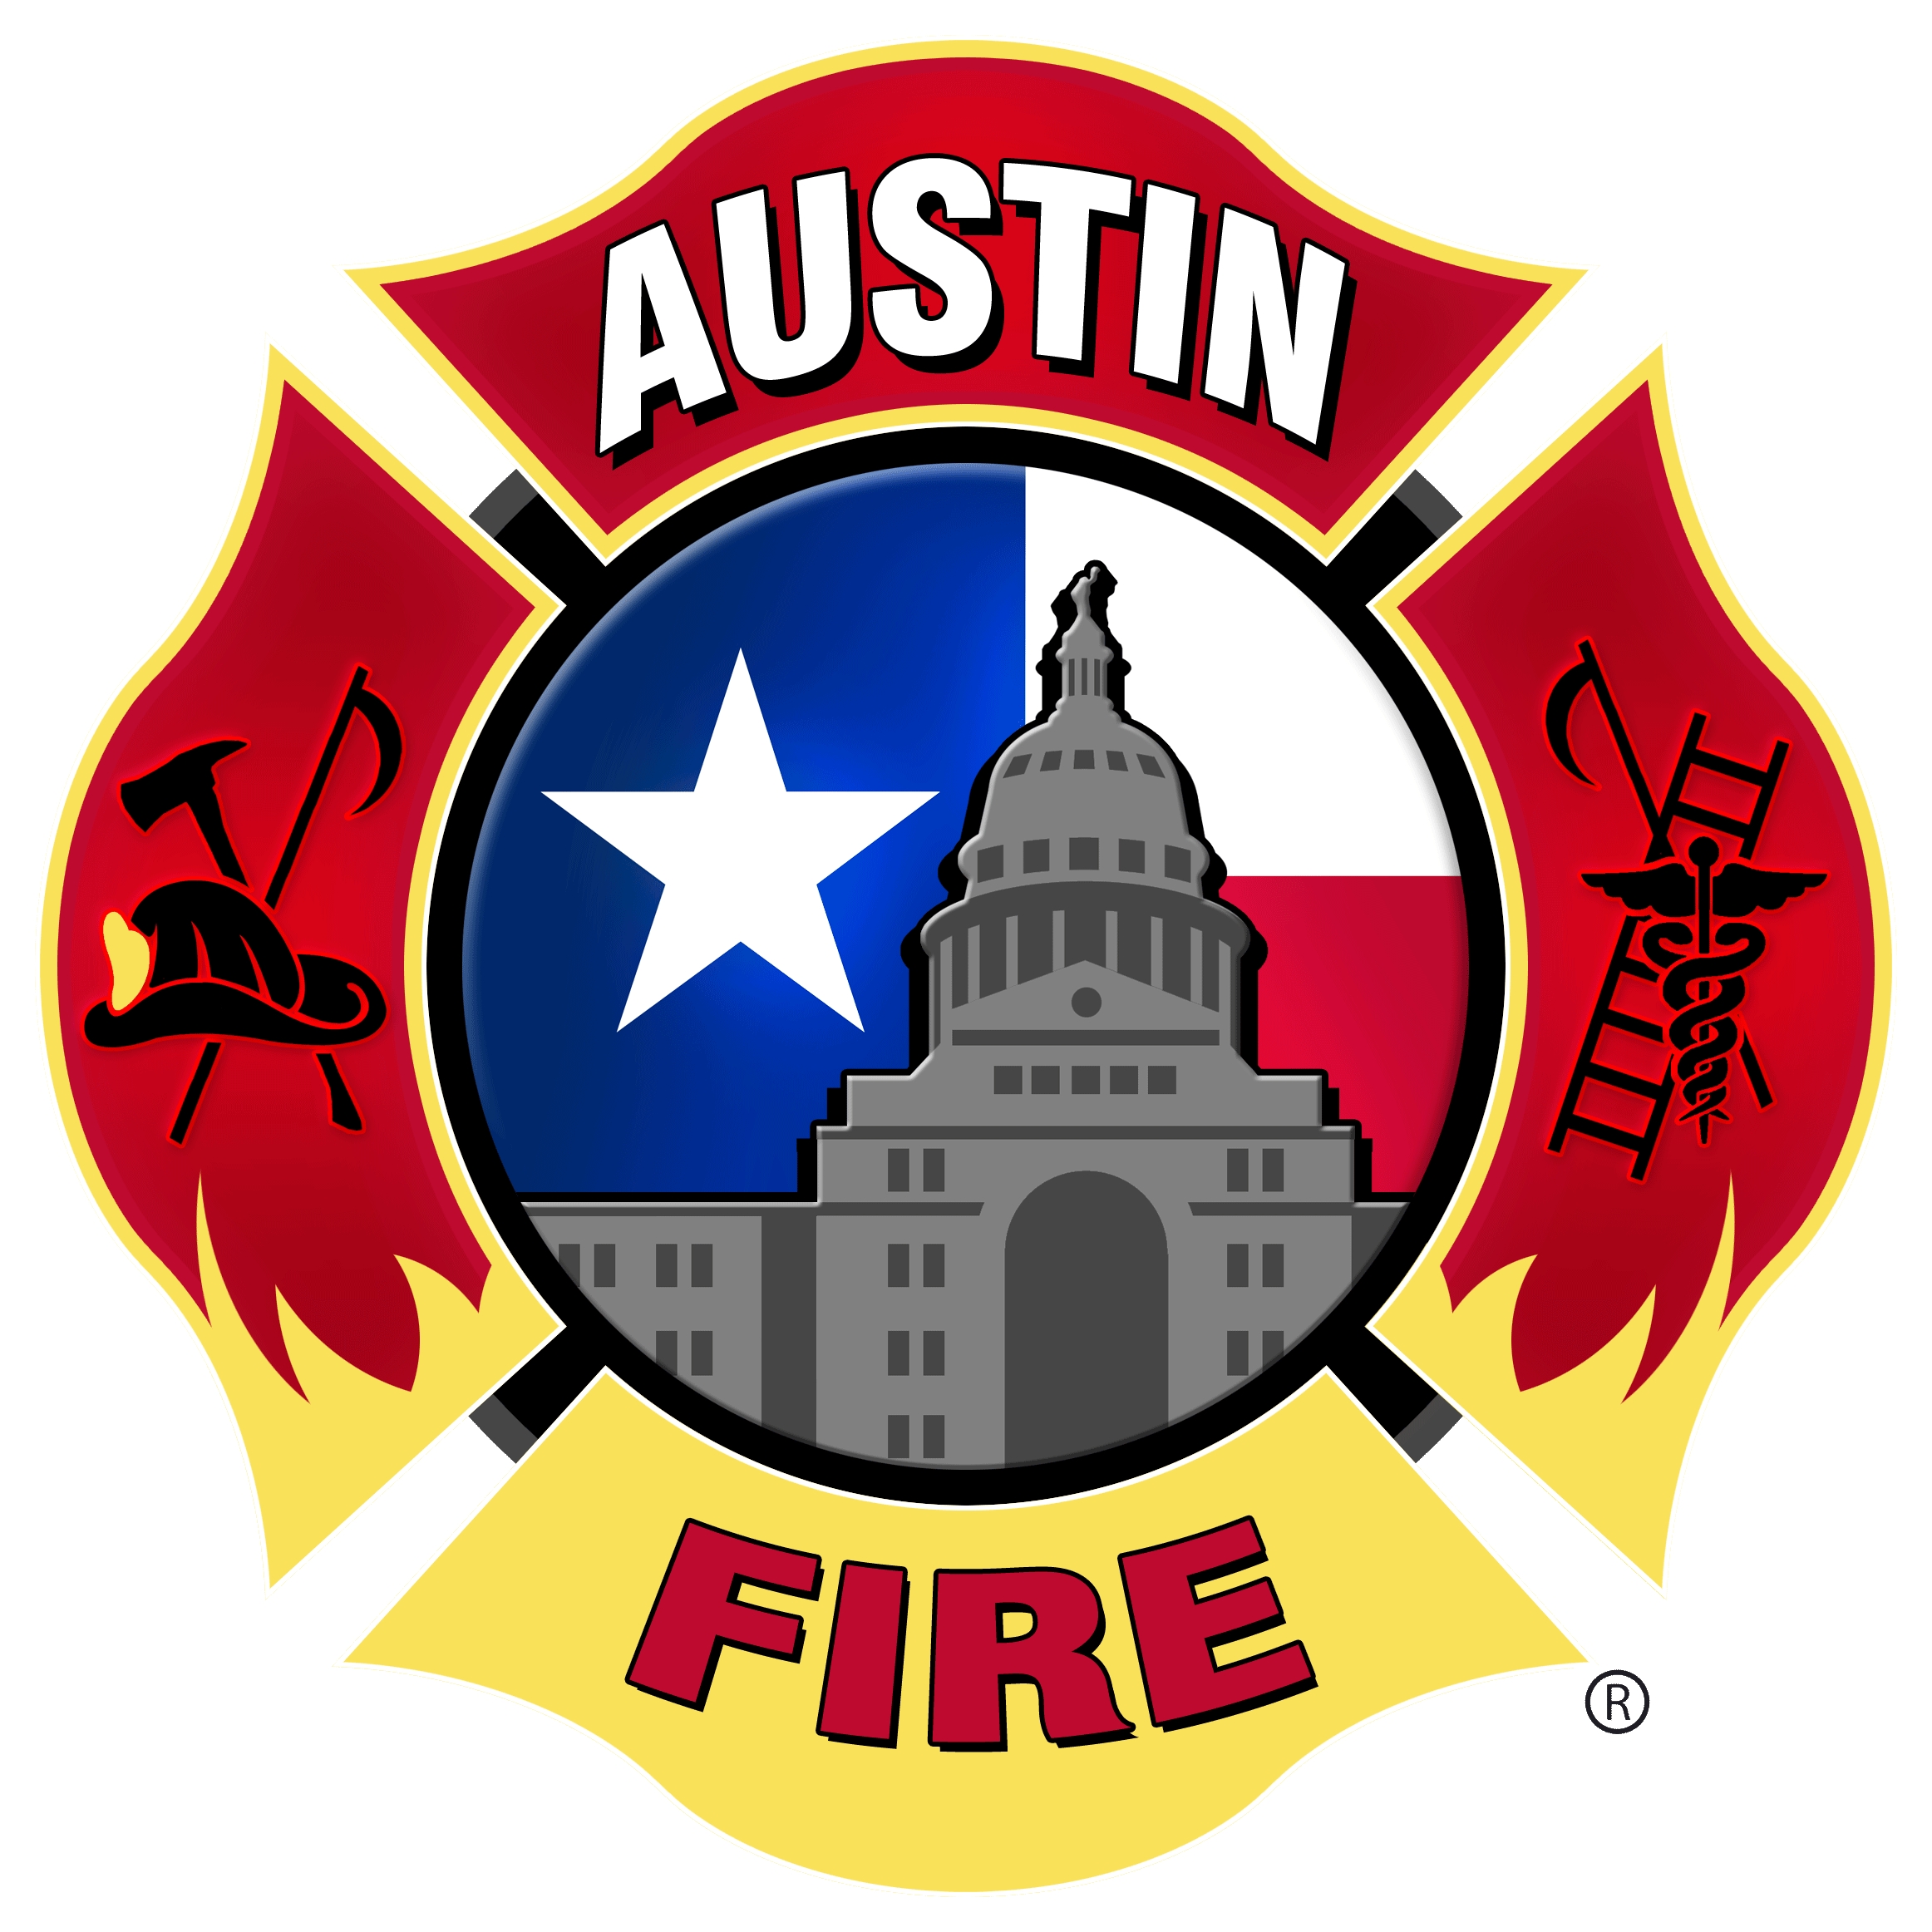 City approves Austin Fire Department drone study